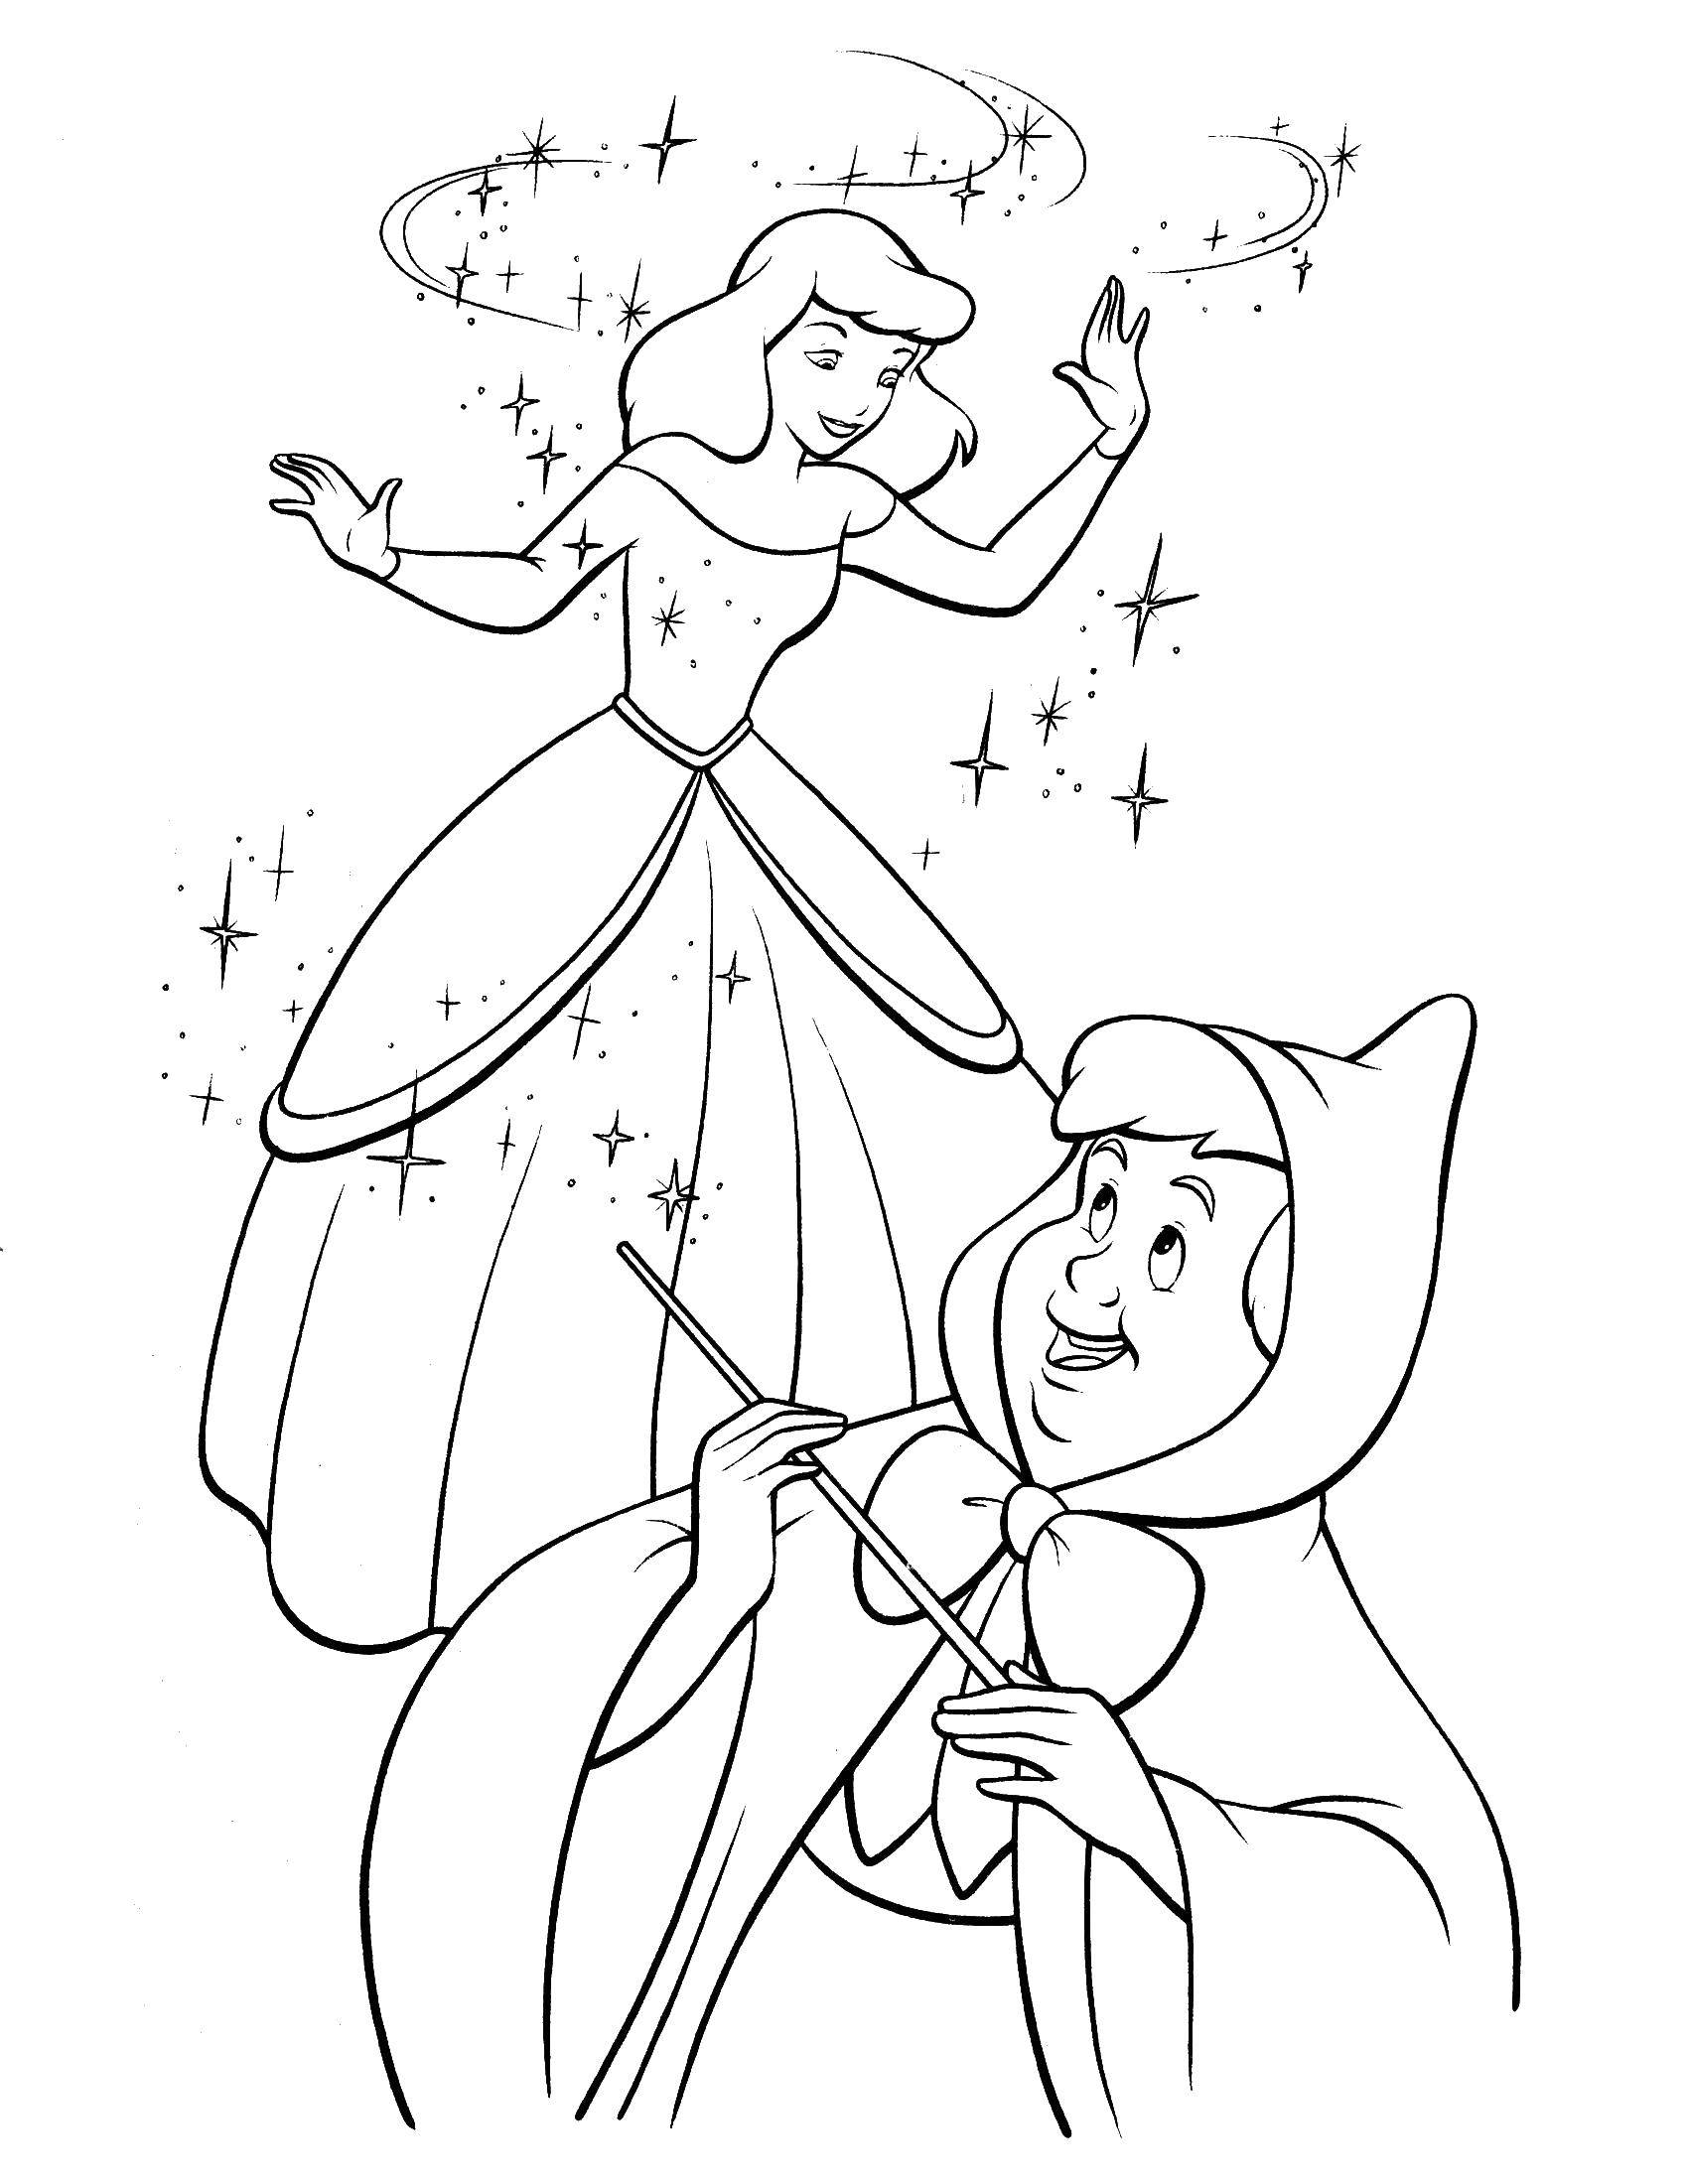 Coloring Fairy casts a spell over Cinderella dress. Category Cinderella and the Prince. Tags:  Cinderella.